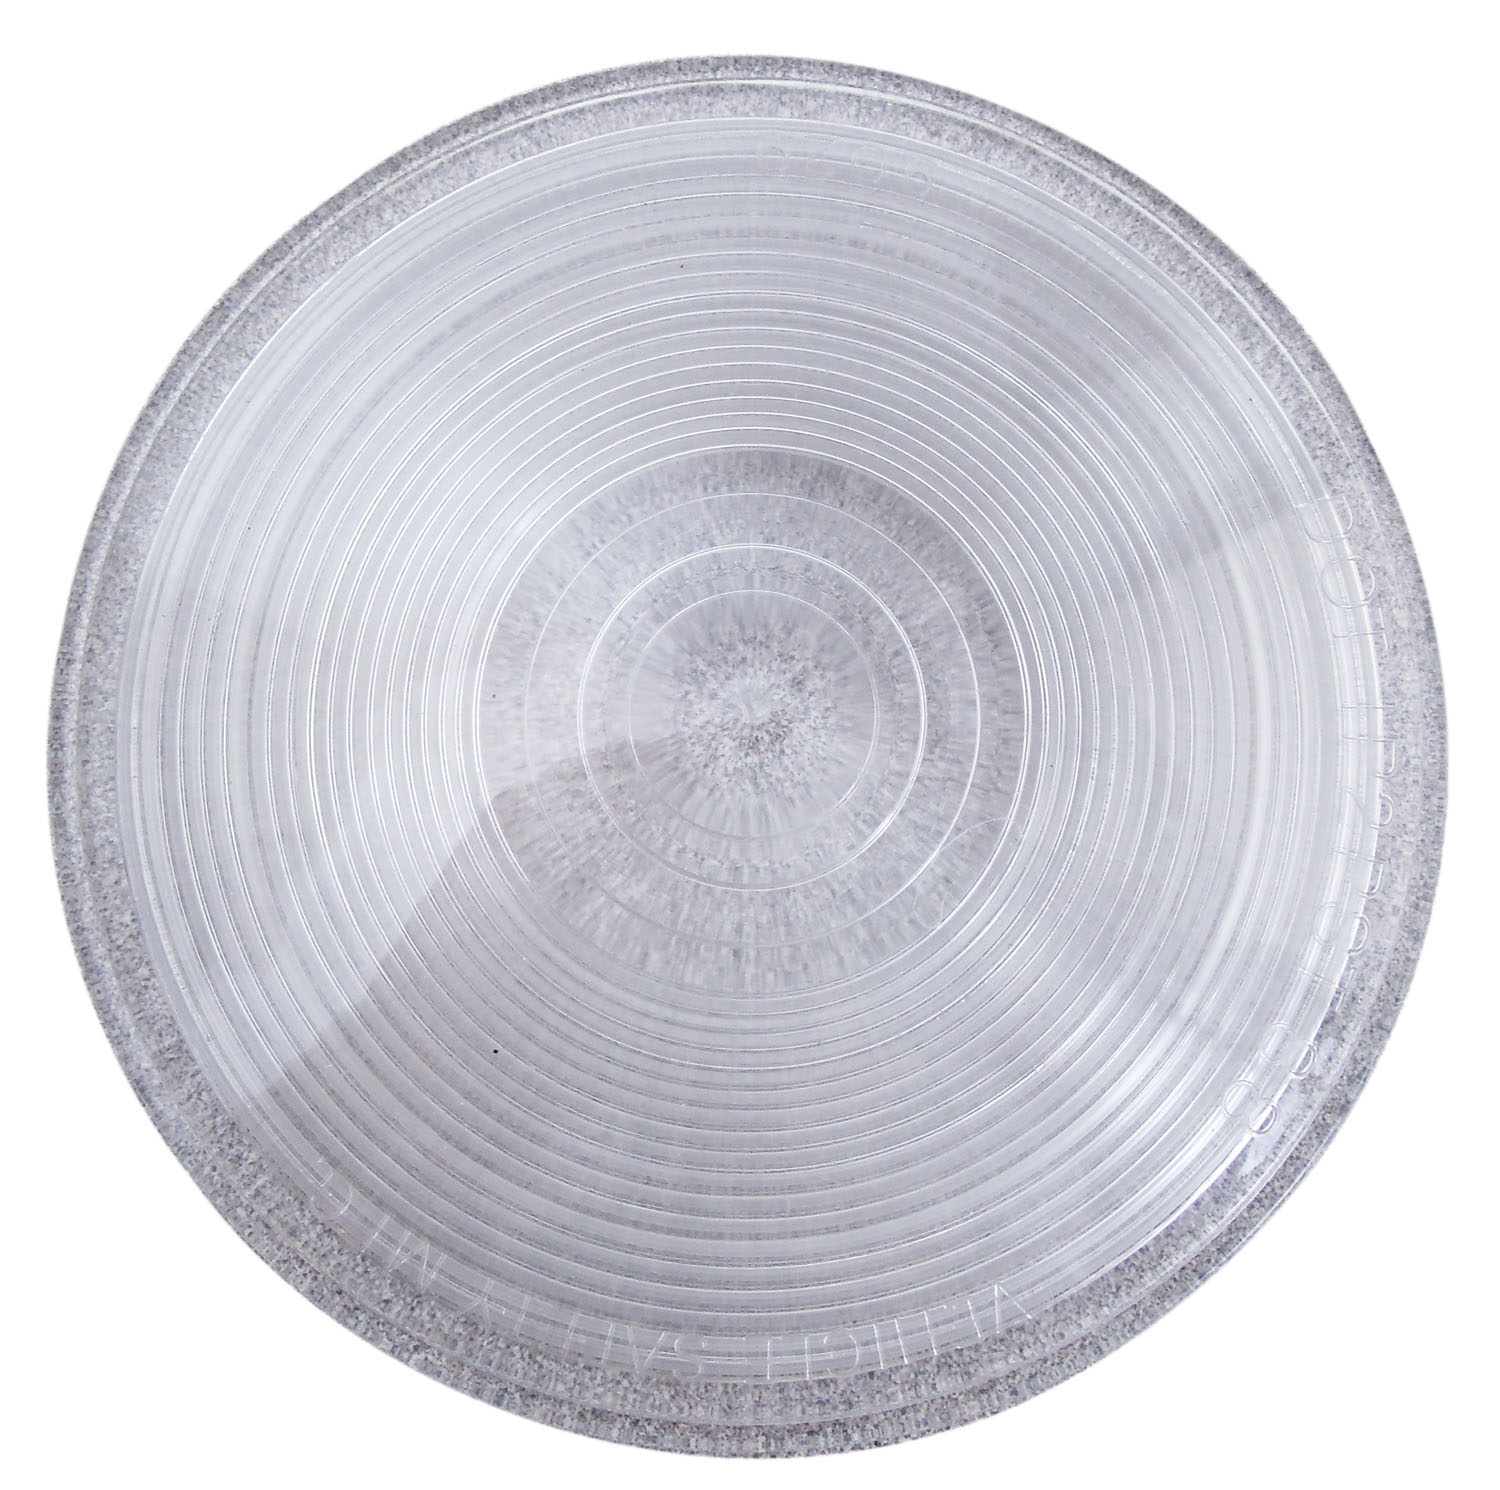 4-1/4" ROUND CLEAR REPLACEMENT LENS COVER 9029 DOT IP2PST88 - BULK